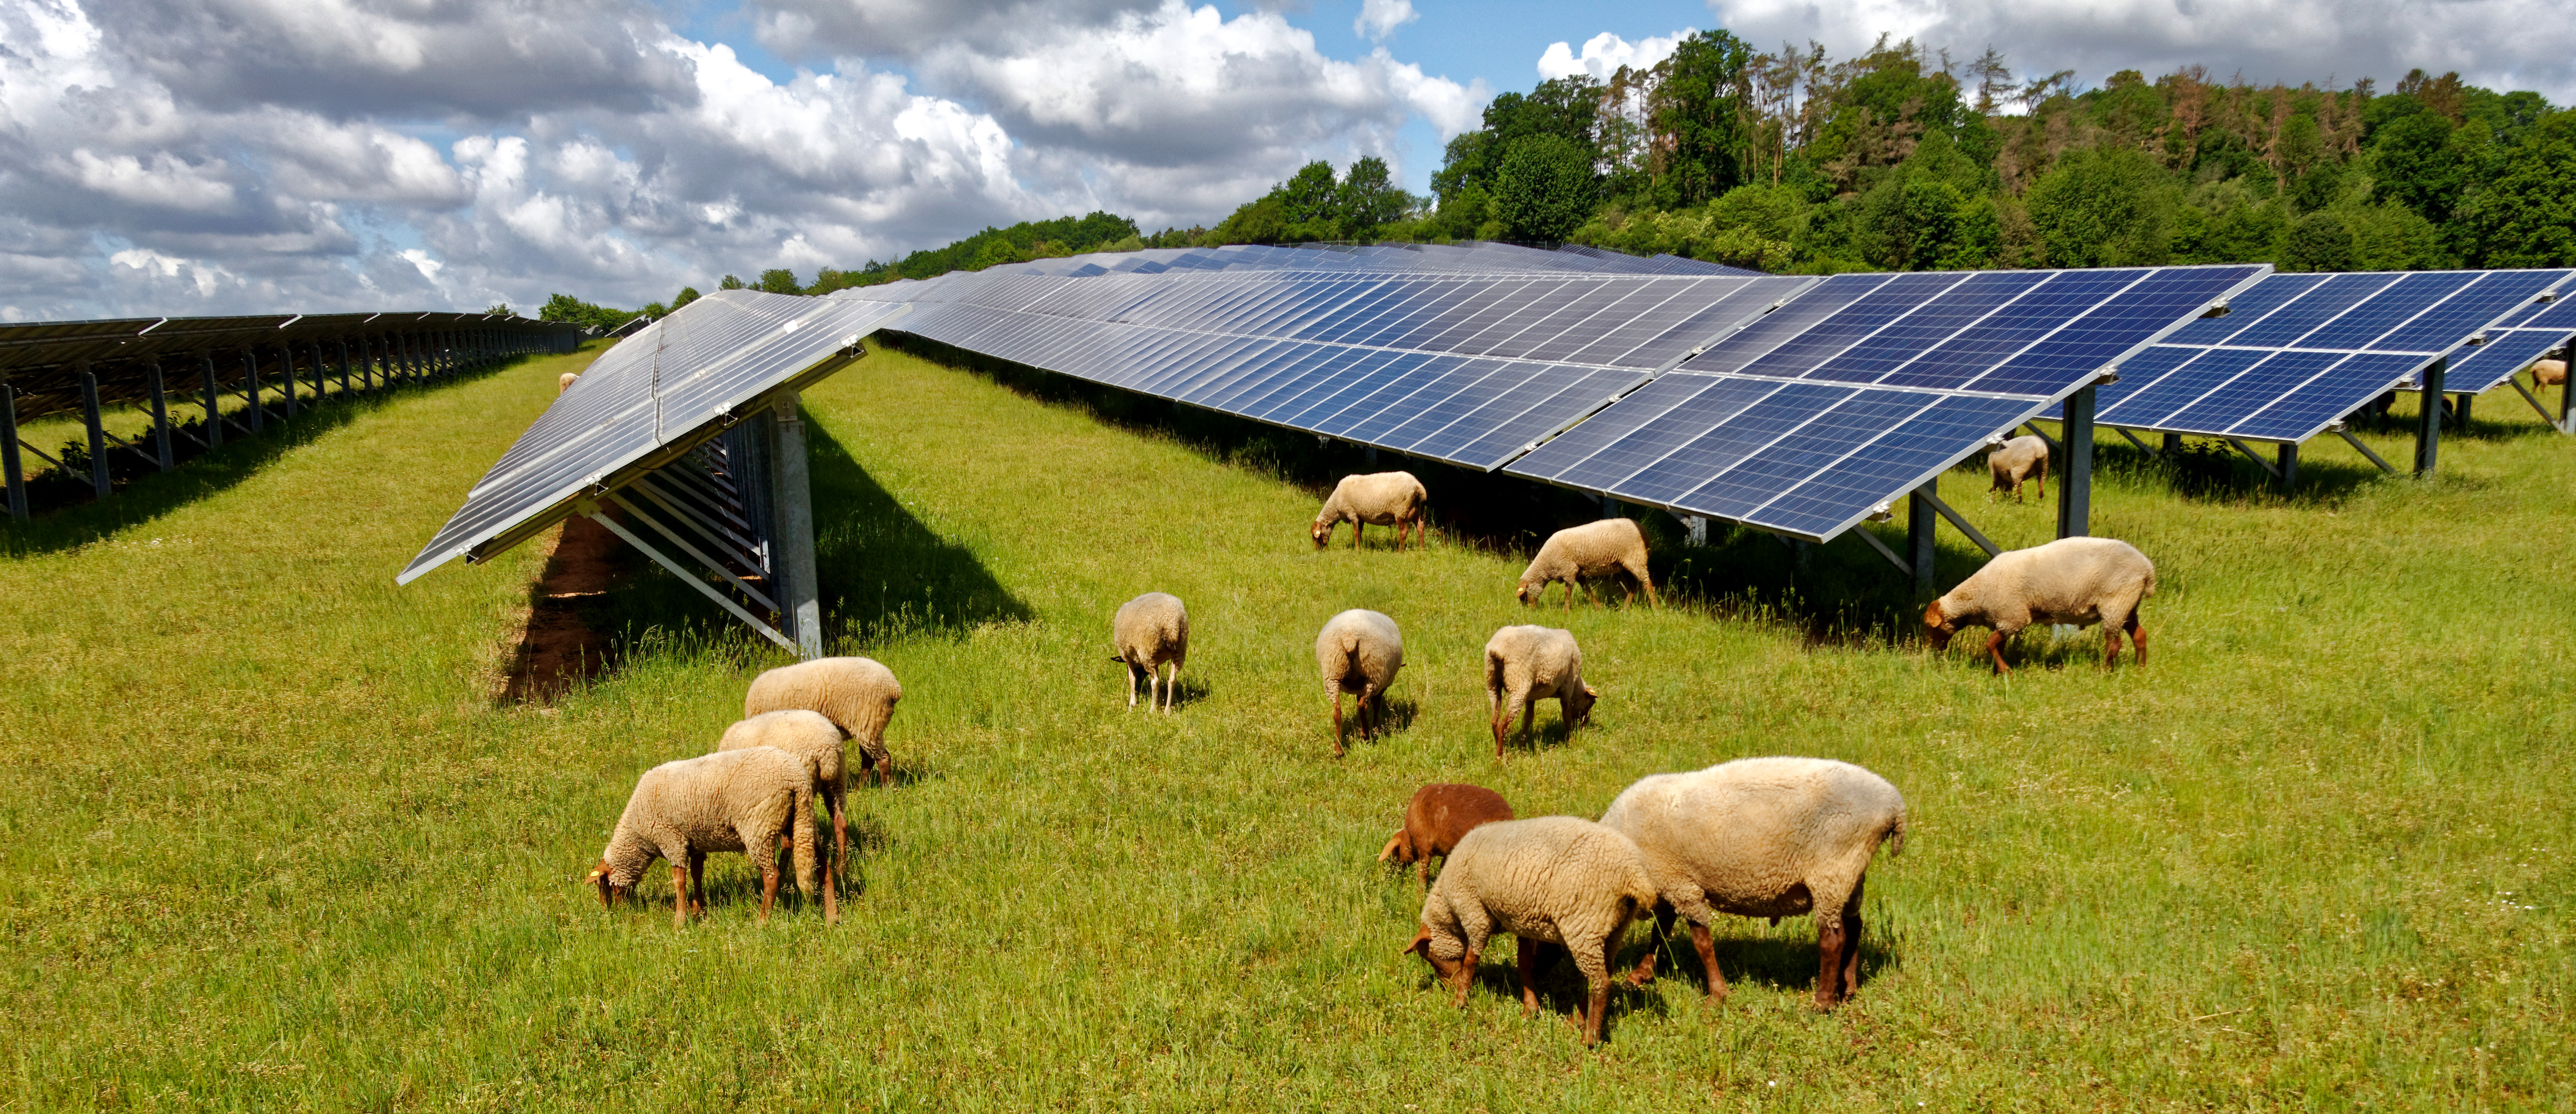 Sustainable agriculture header image with sheep